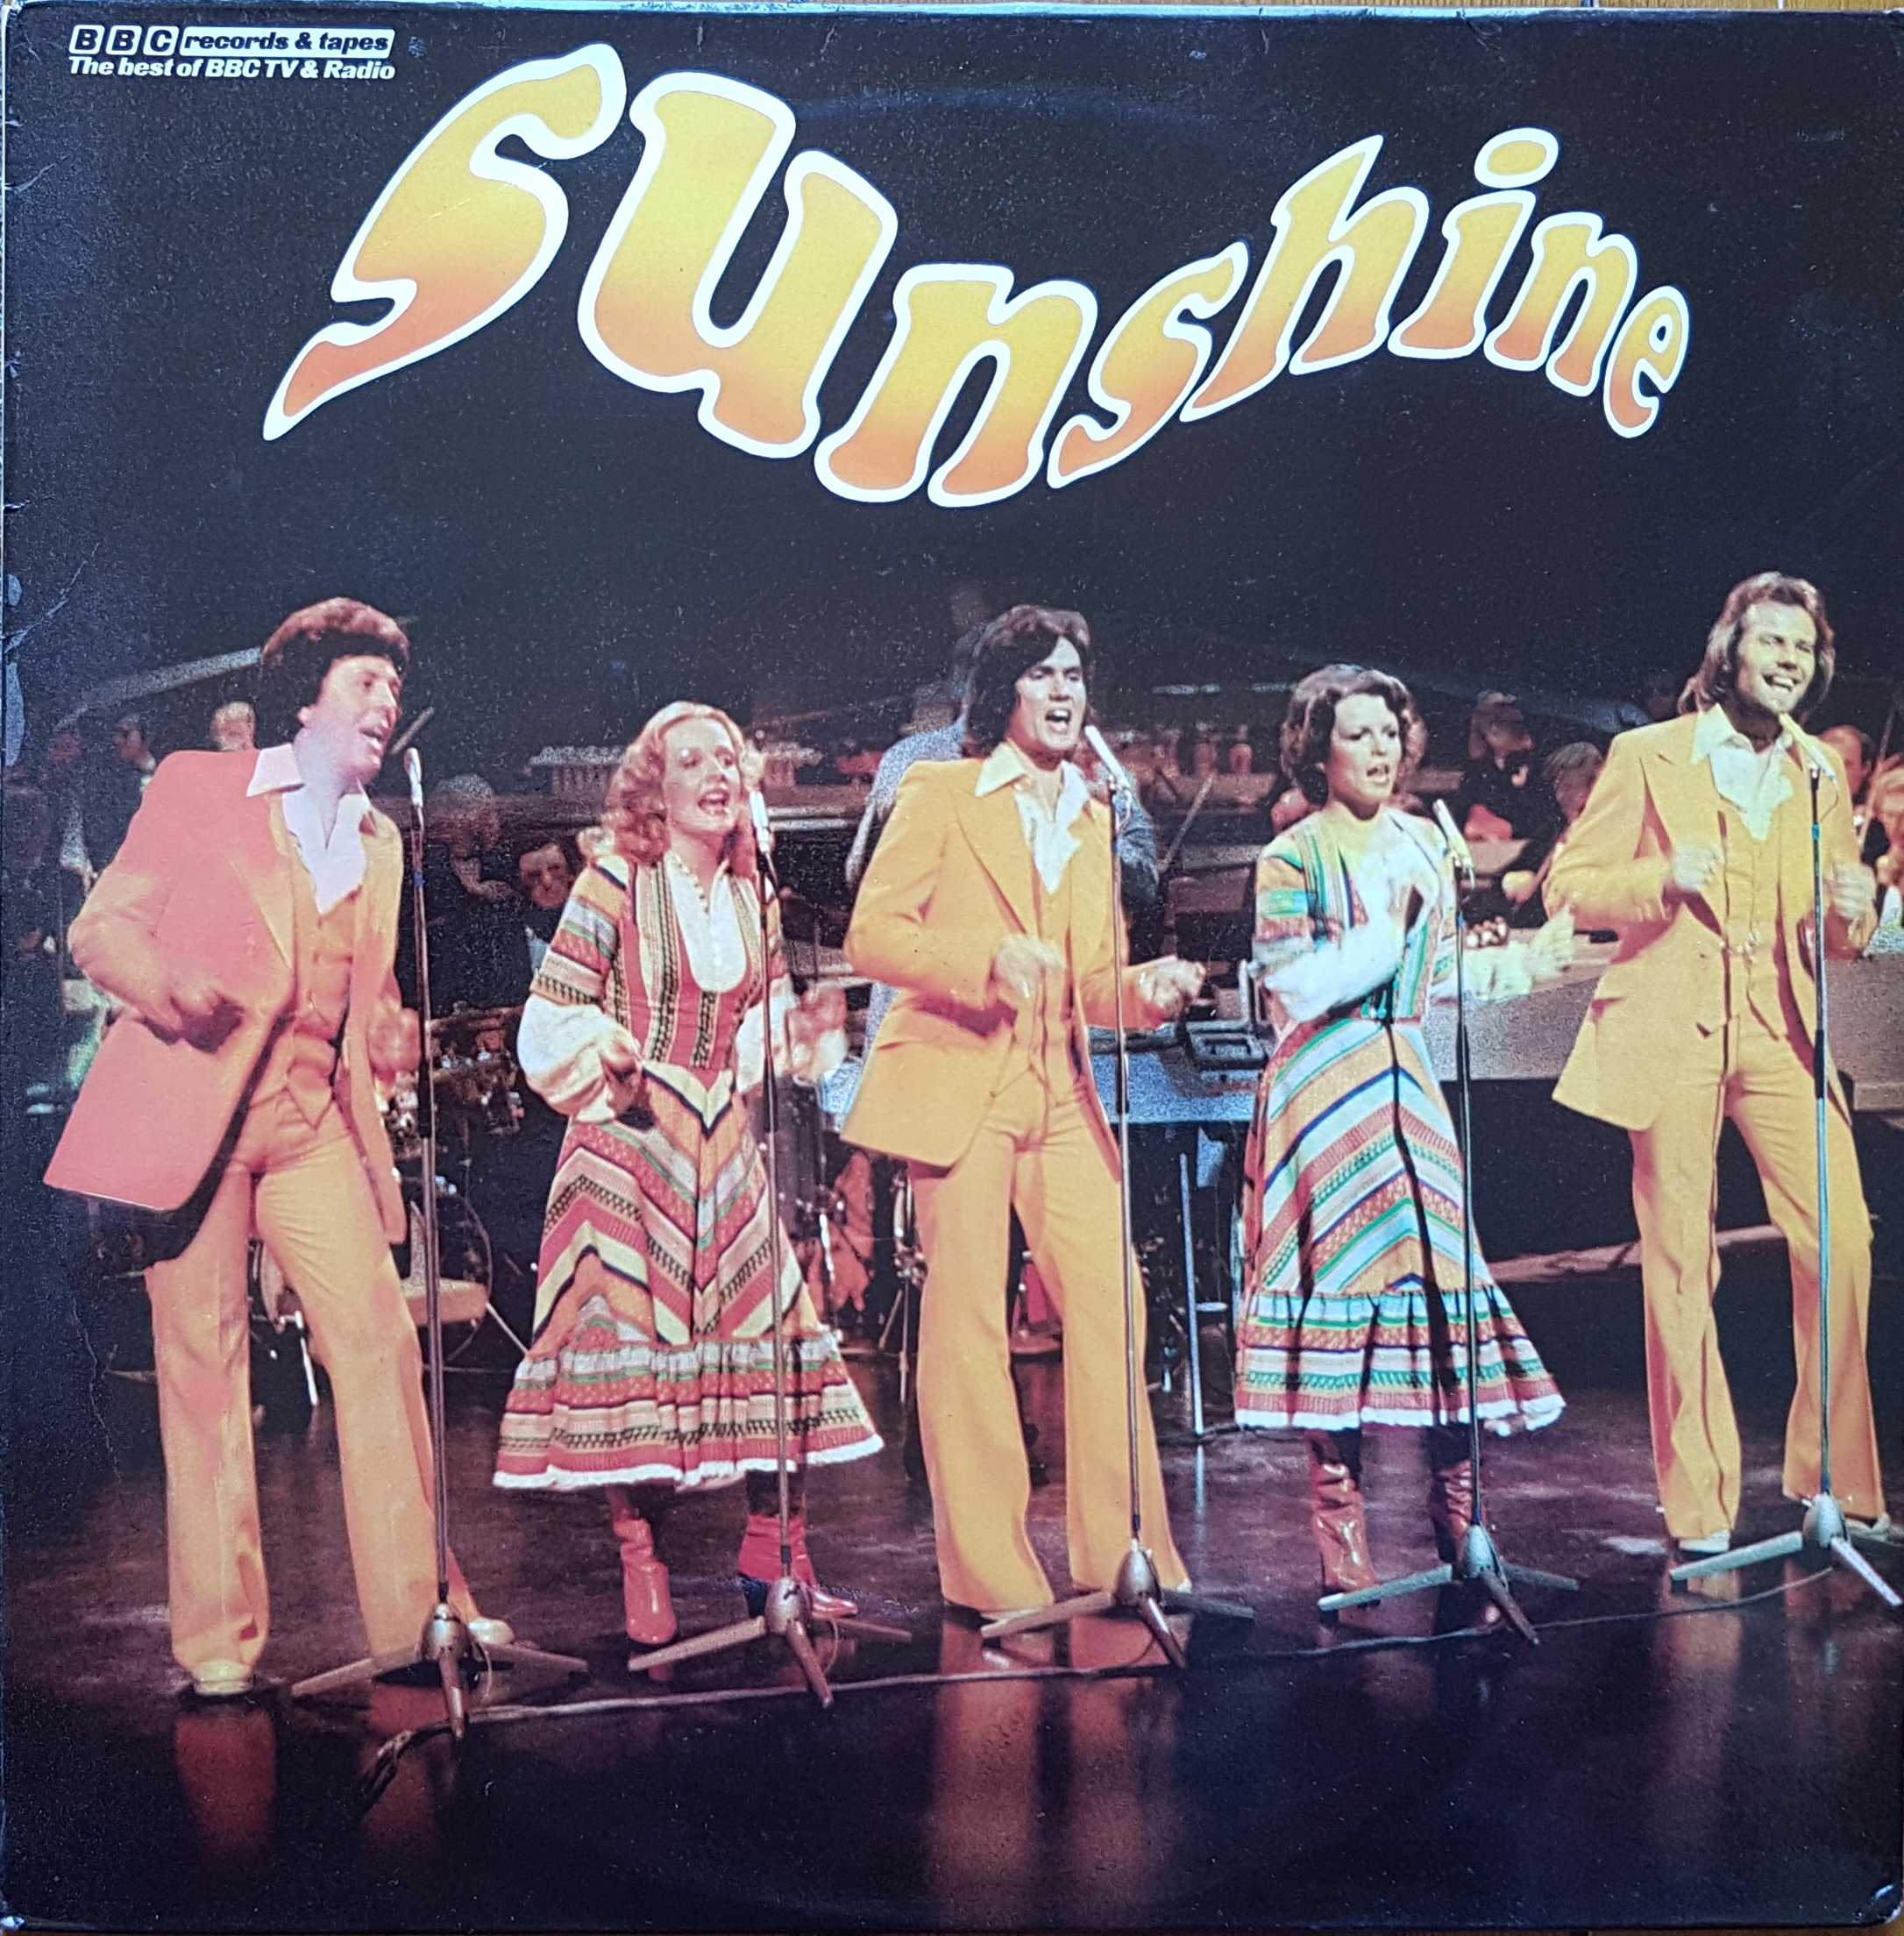 Picture of Sunshine by artist Sunshine from the BBC albums - Records and Tapes library